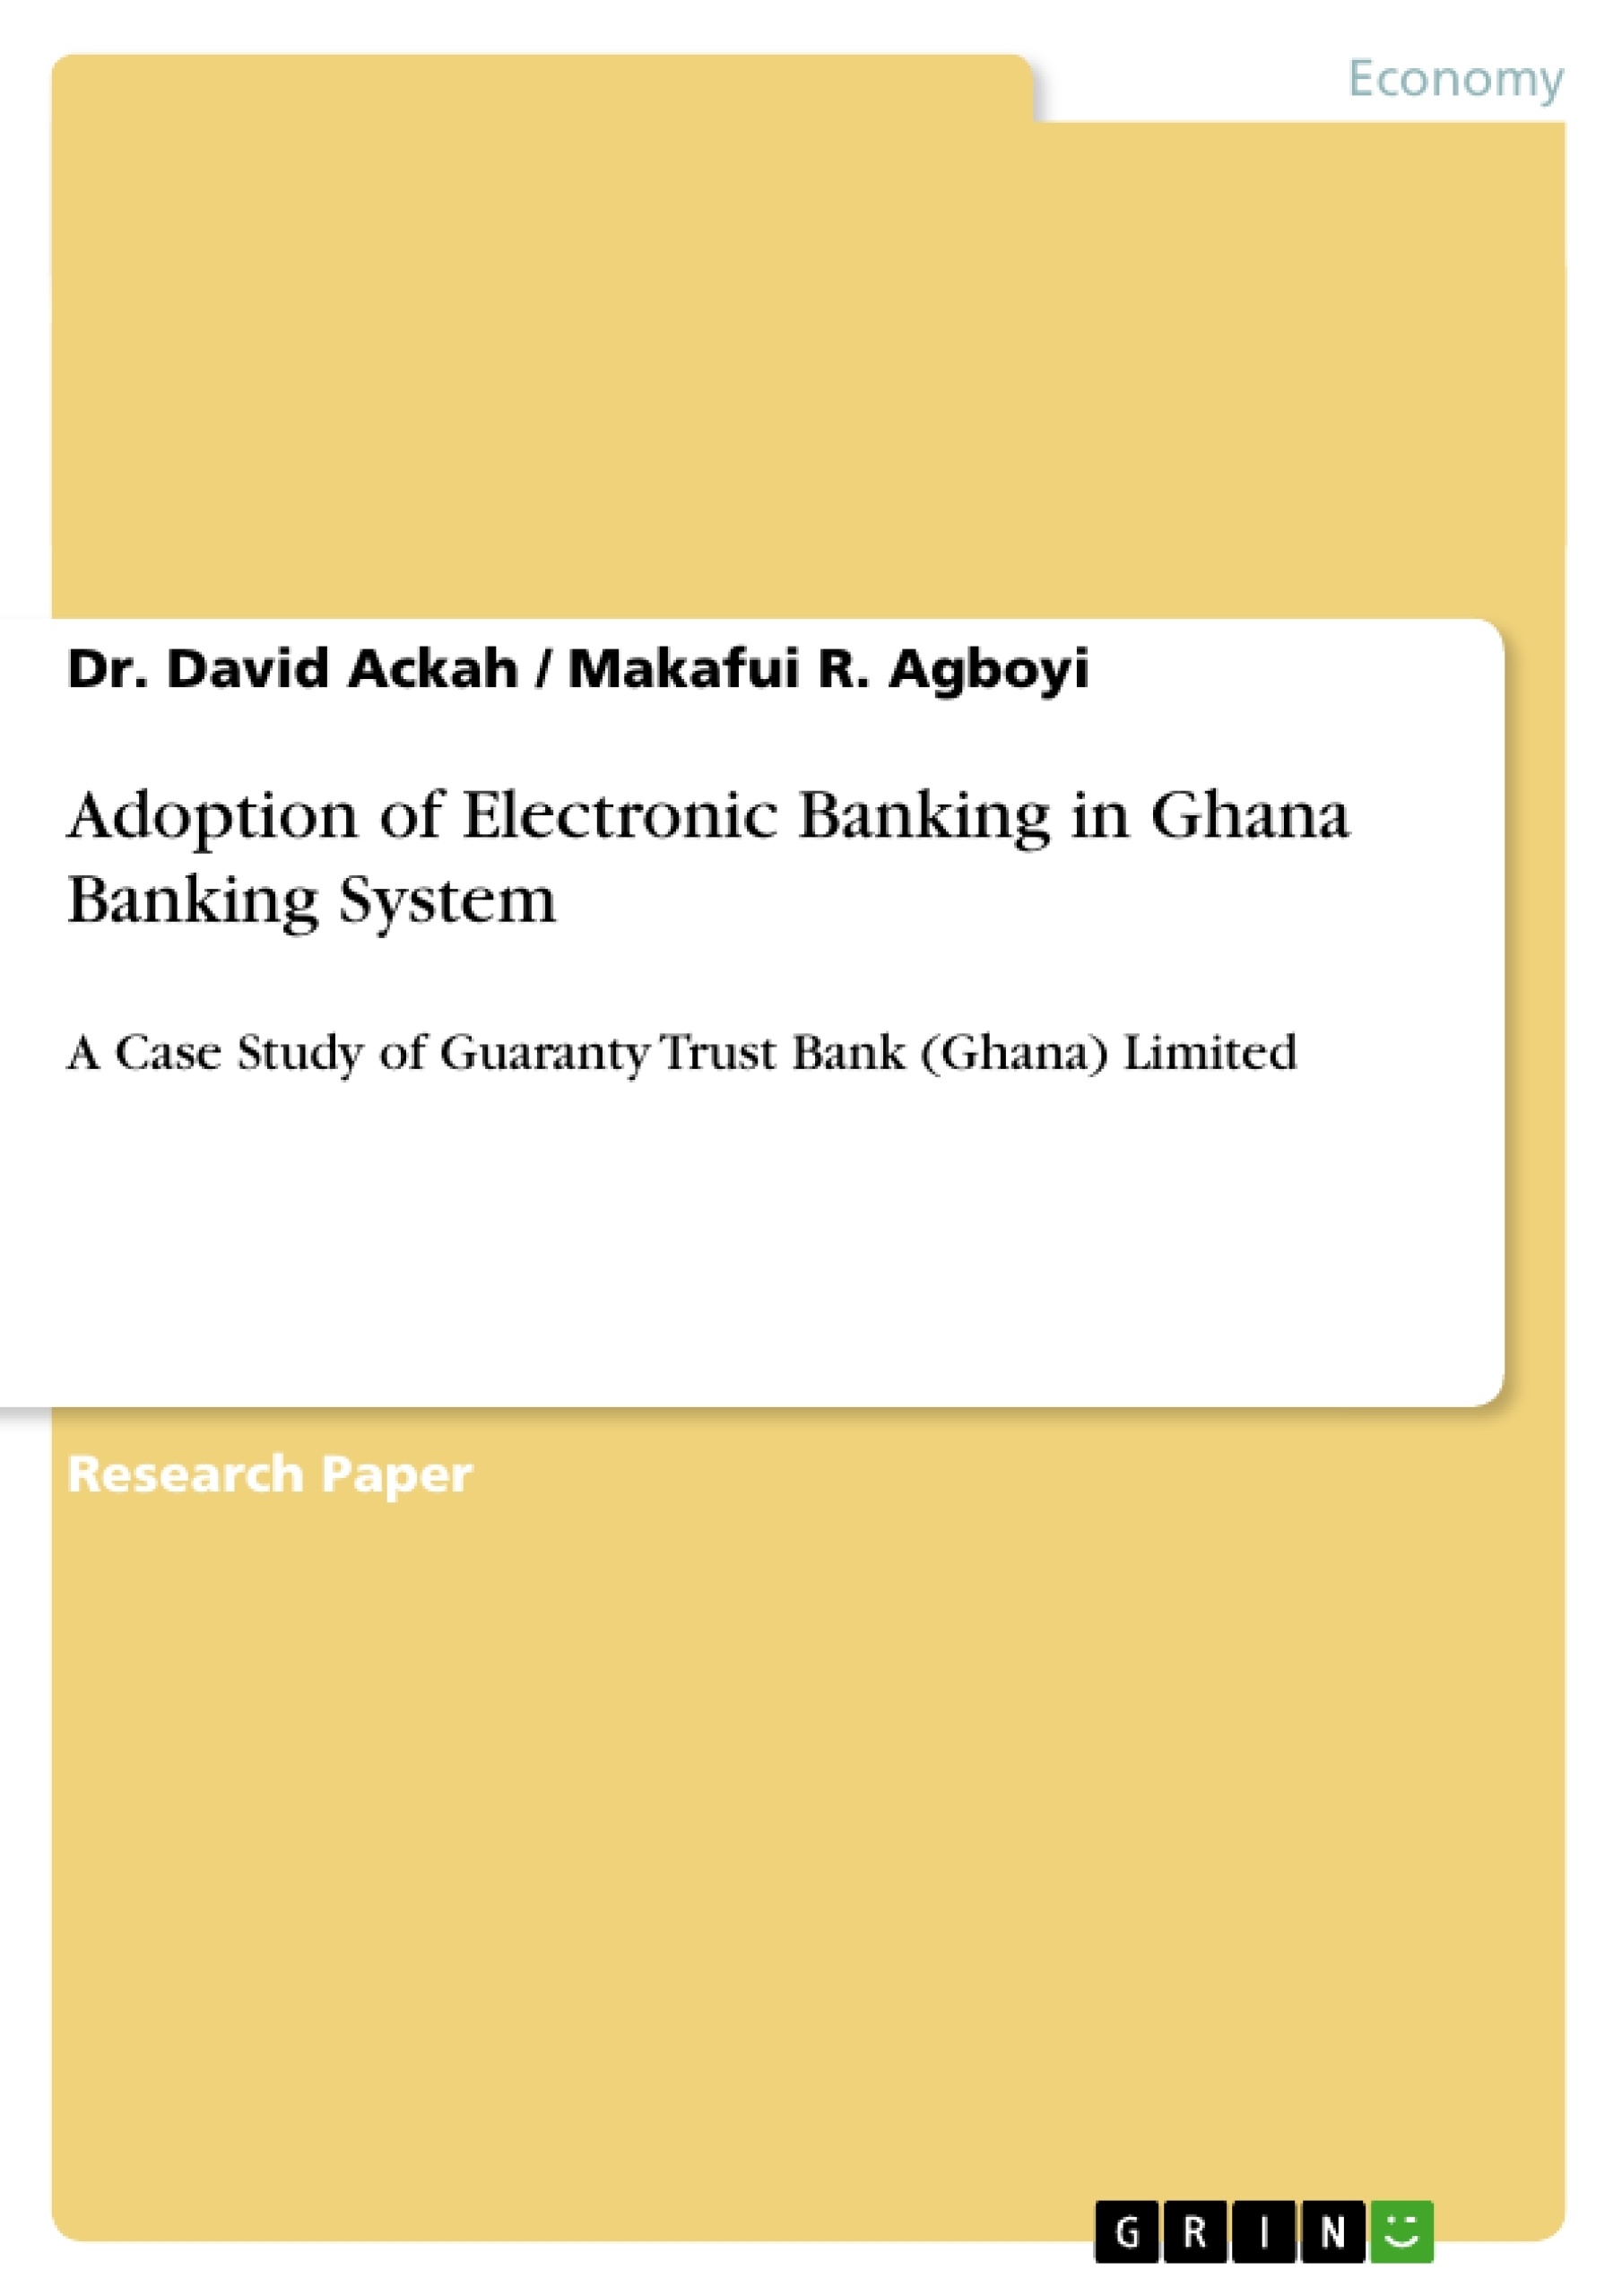 Titel: Adoption of Electronic Banking in Ghana Banking System